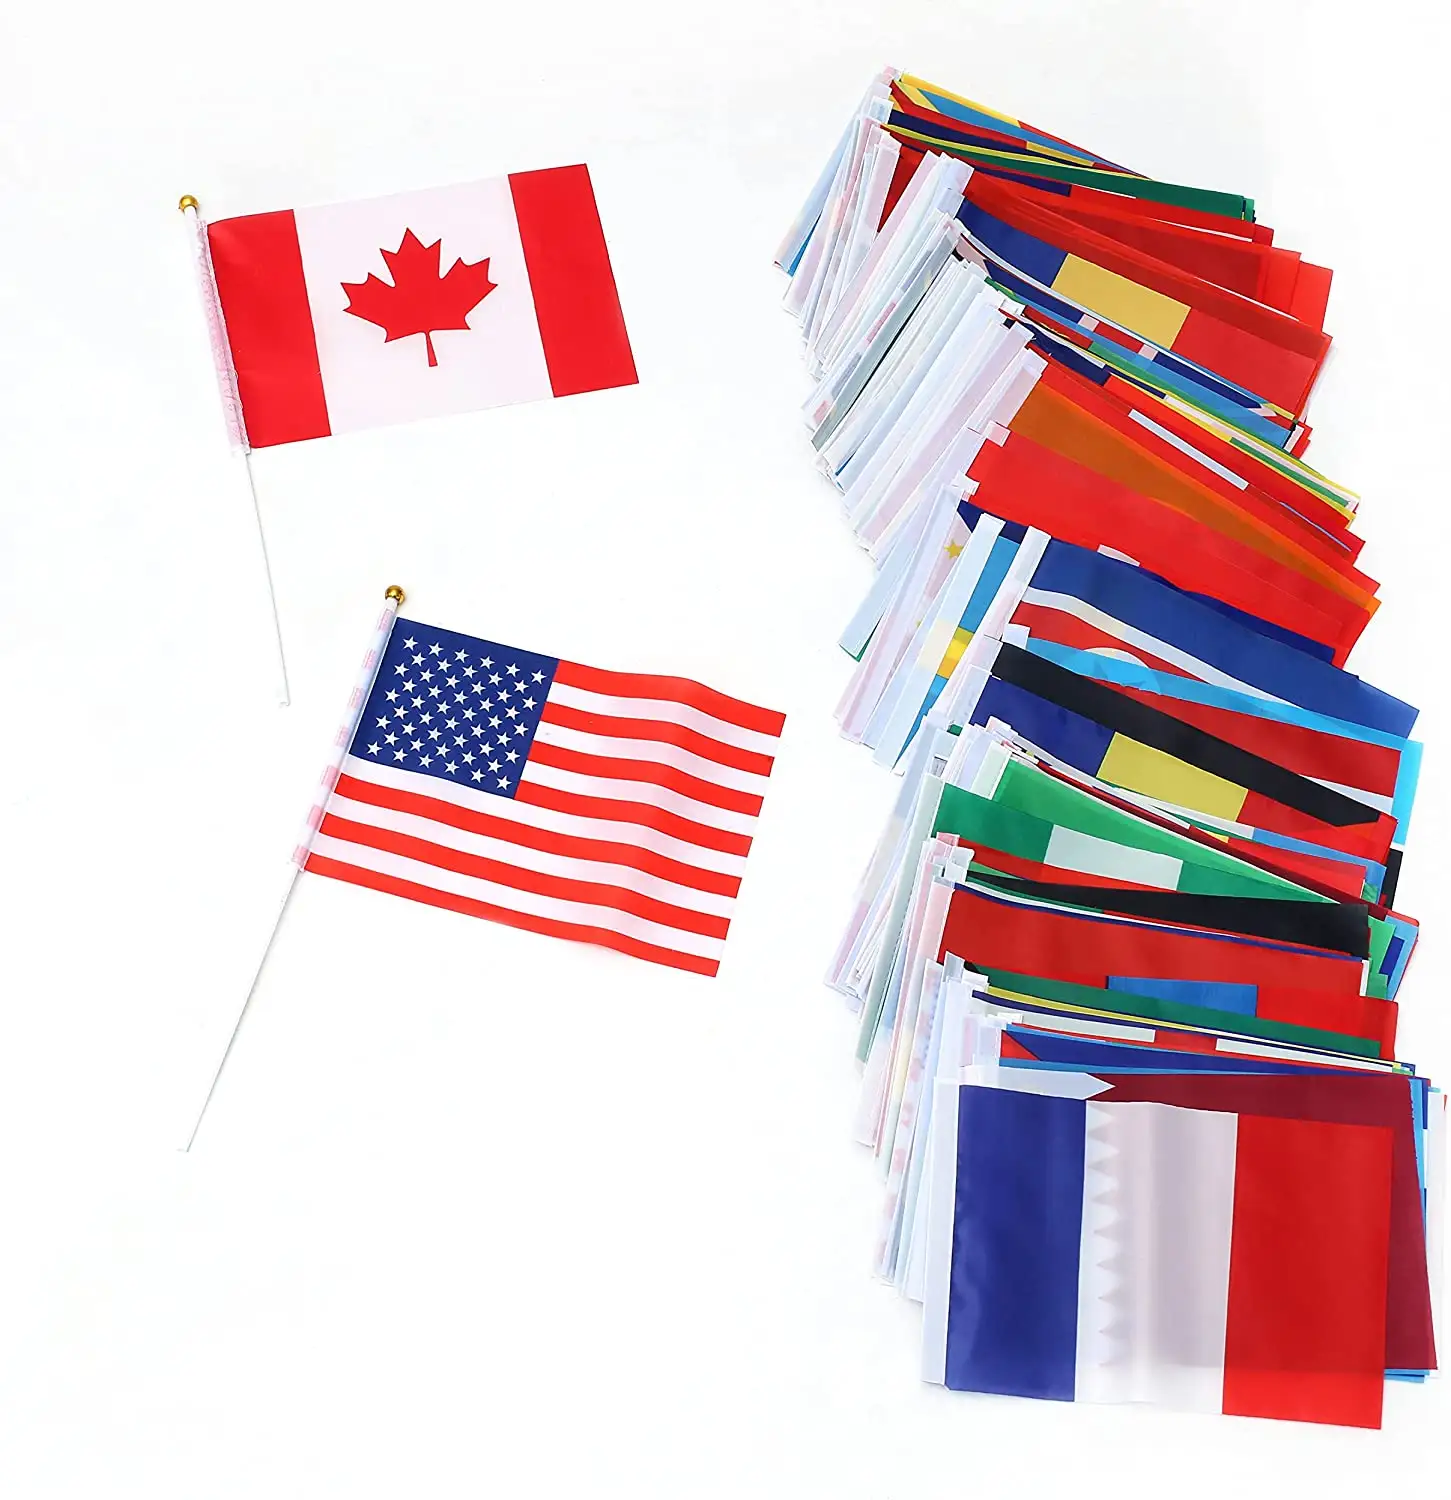 50 Countries International World Stick Flag,Hand Held Small Mini National Pennant Flags Banners On Stick